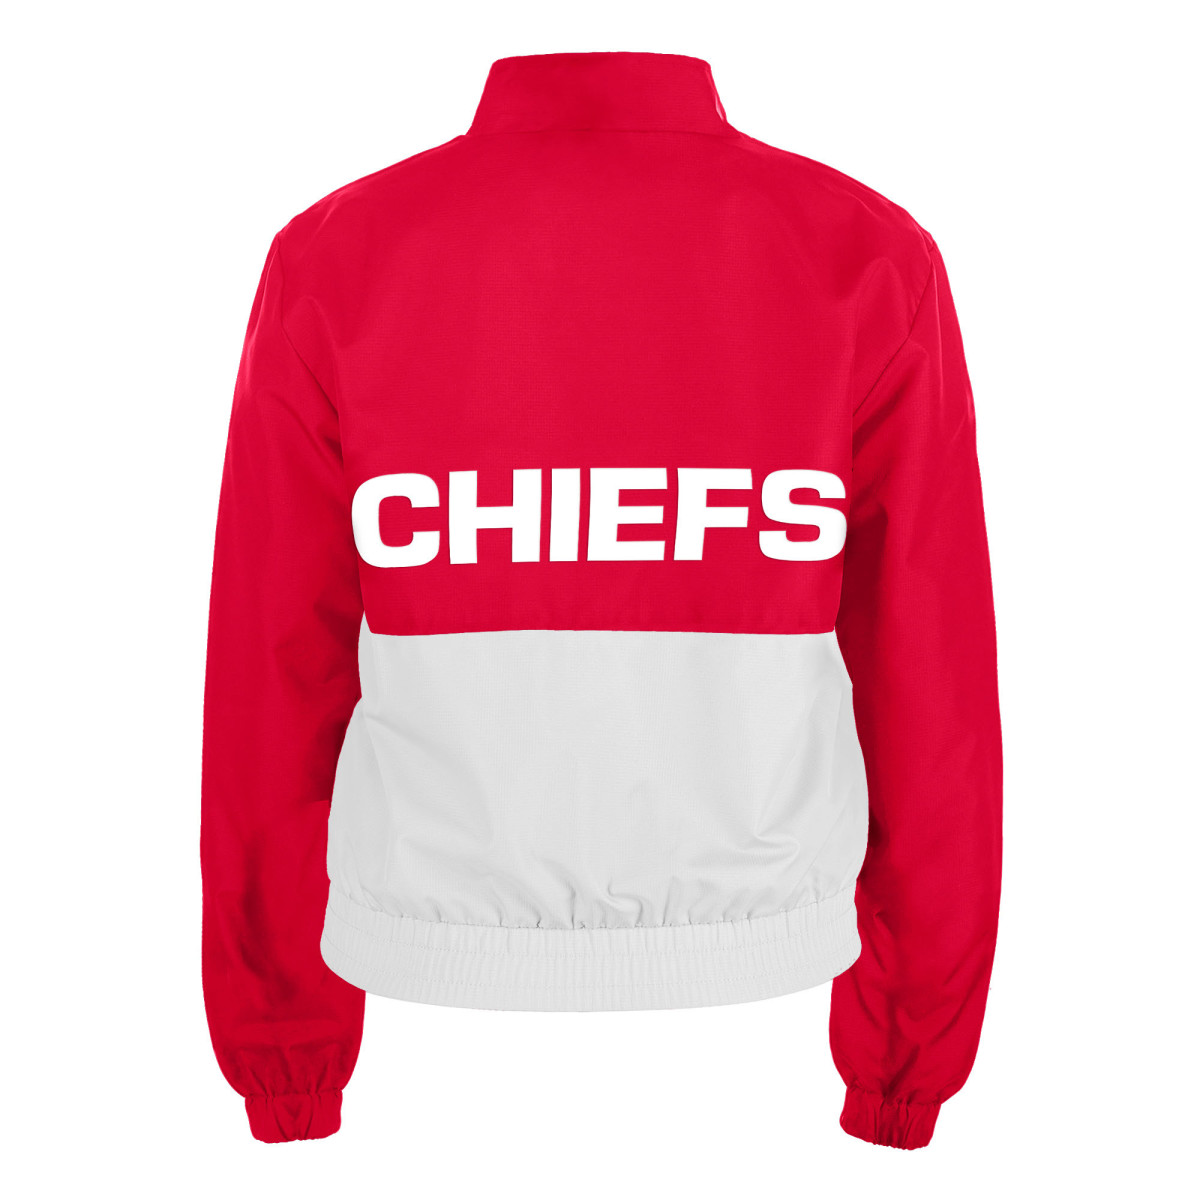 Taylor Swift's Kansas City Chiefs Jacket from New Era is now